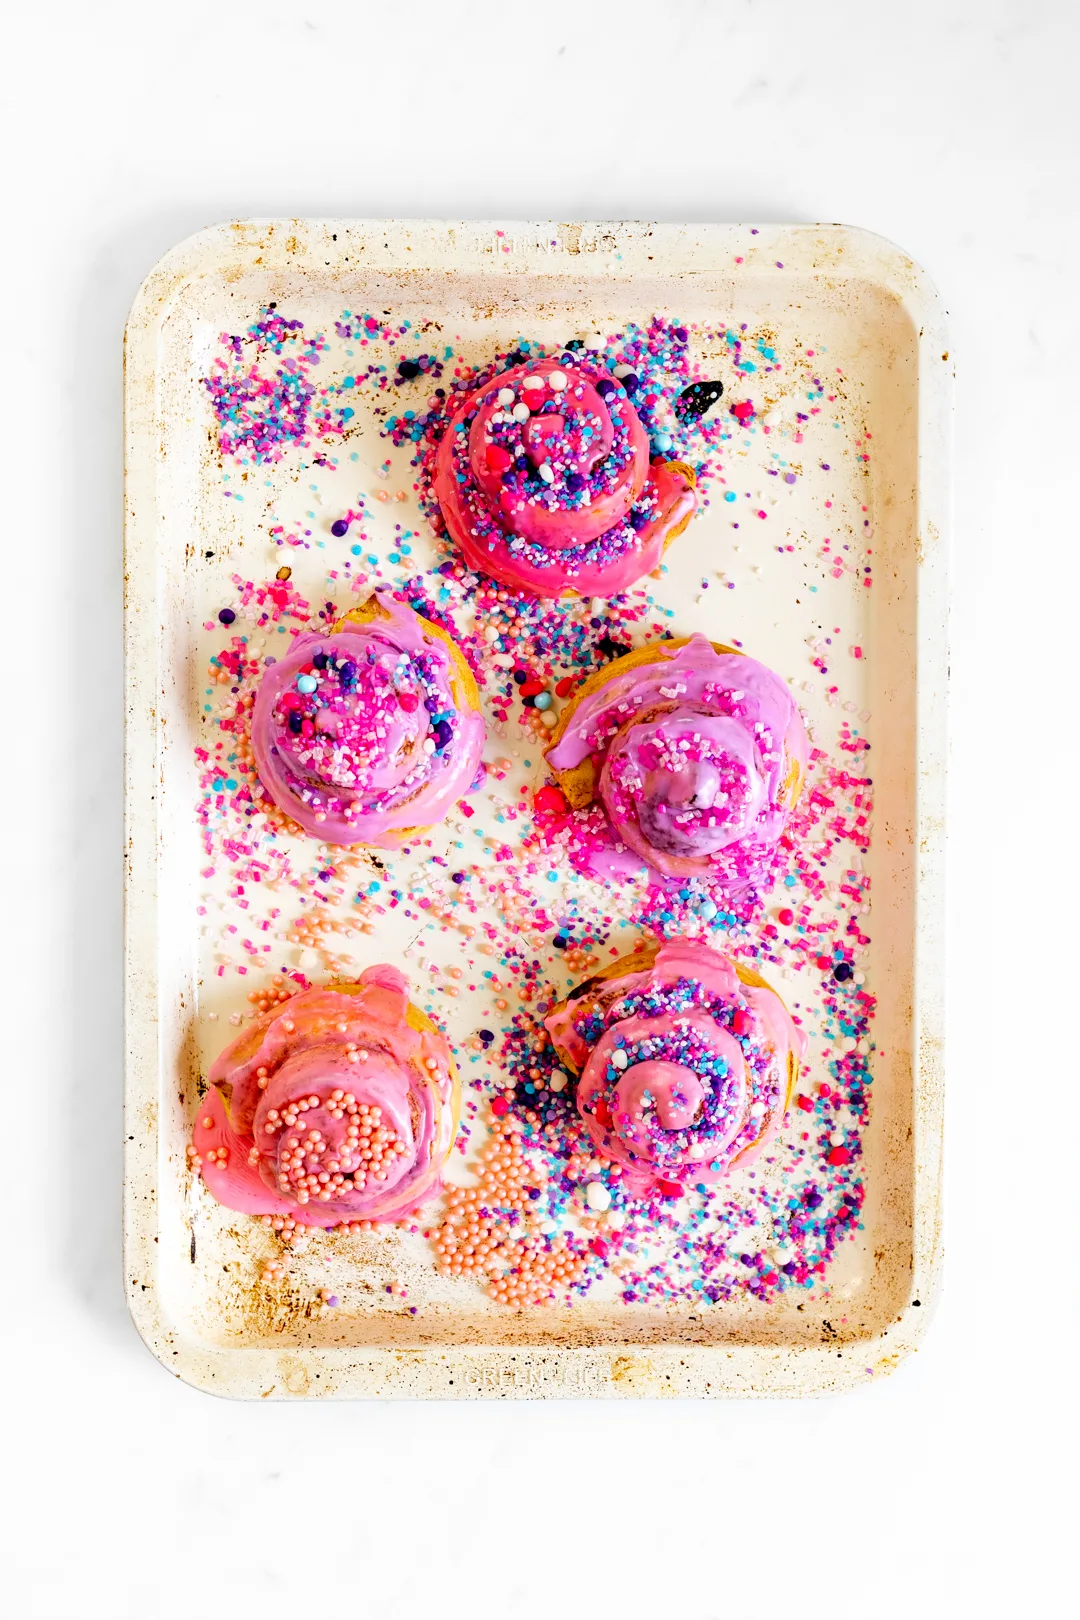 pink cinnamon rolls with colorful sprinkles